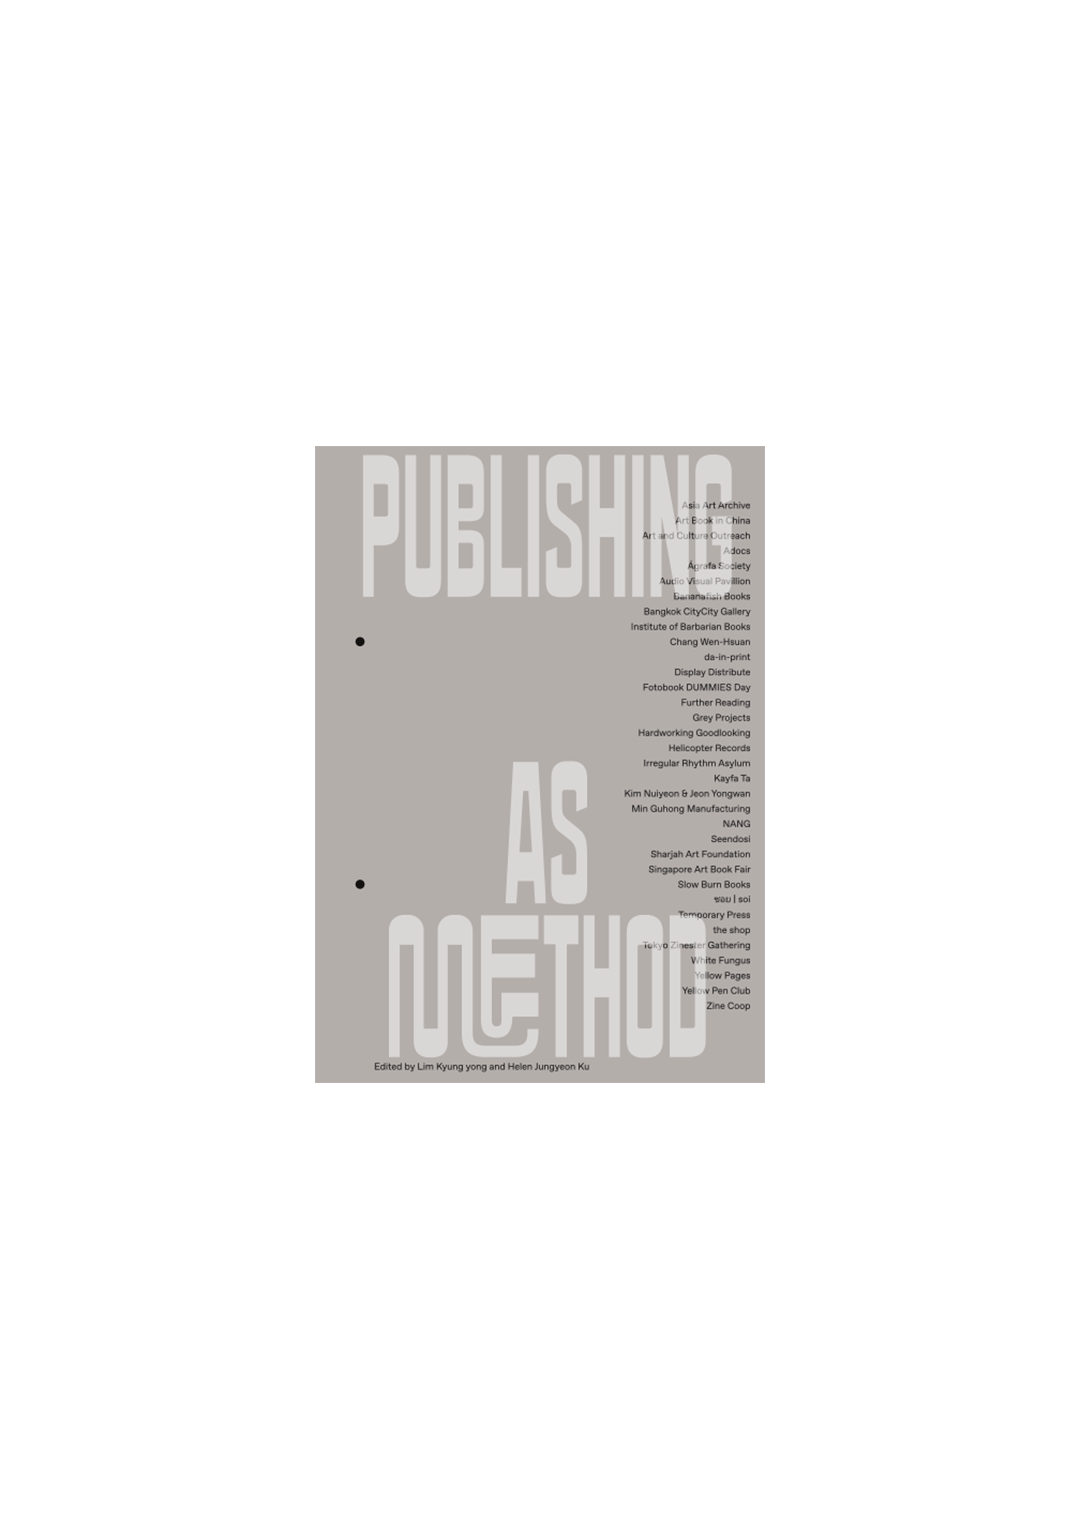 Publishing as method: Ways of Working Together in Asia